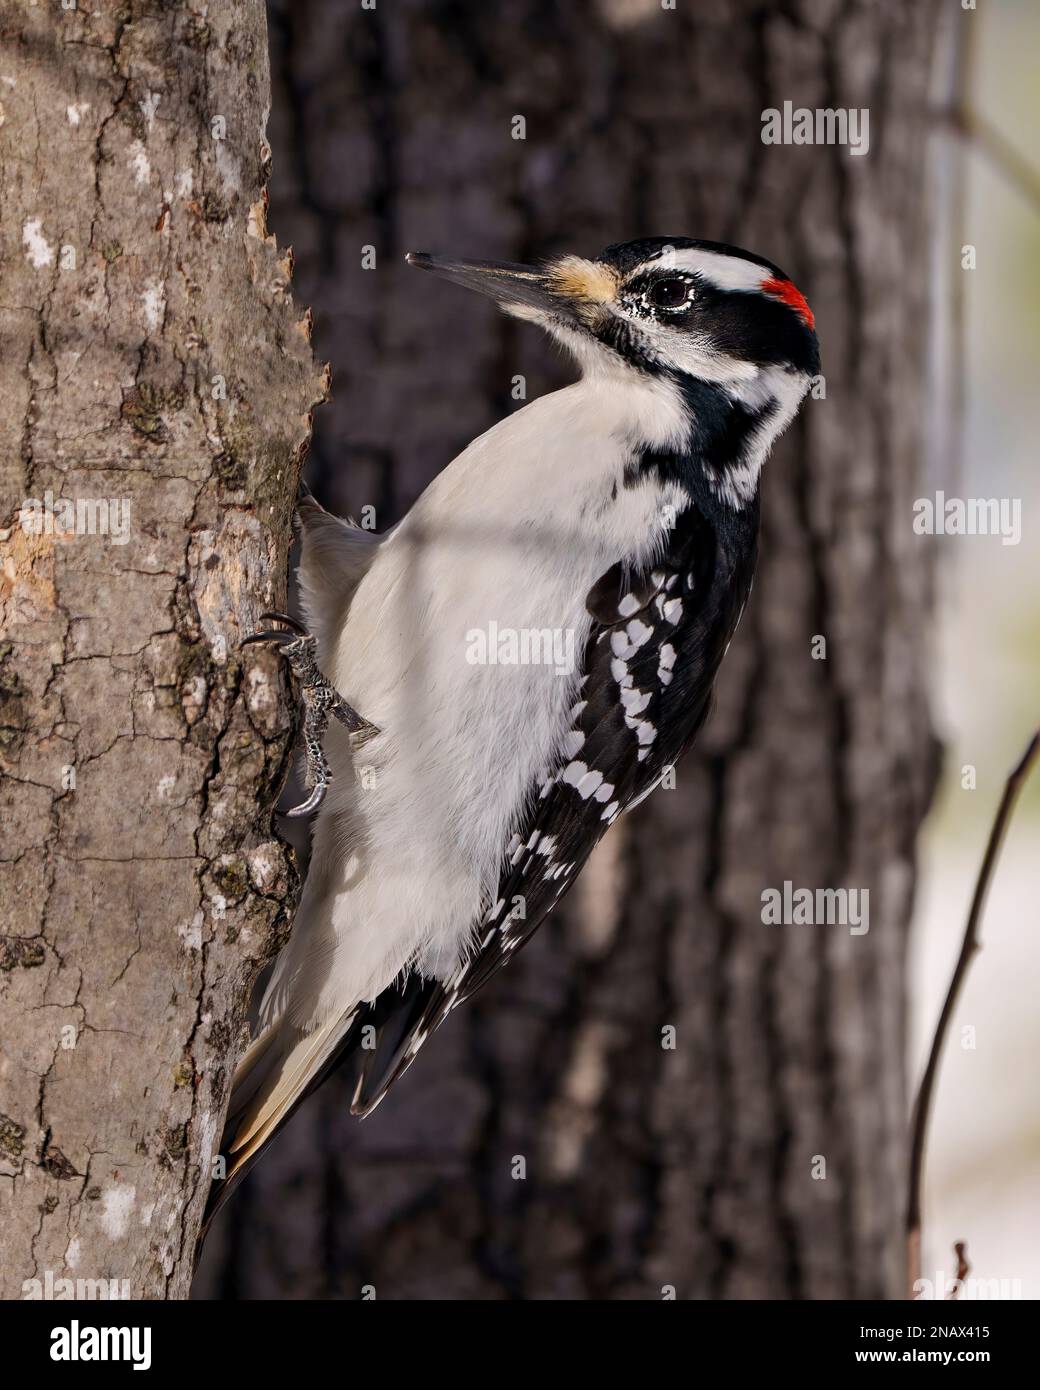 Woodpecker male climbing a tree with a blur forest background in its environment and habitat surrounding, displaying white and black feather plumage. Stock Photo